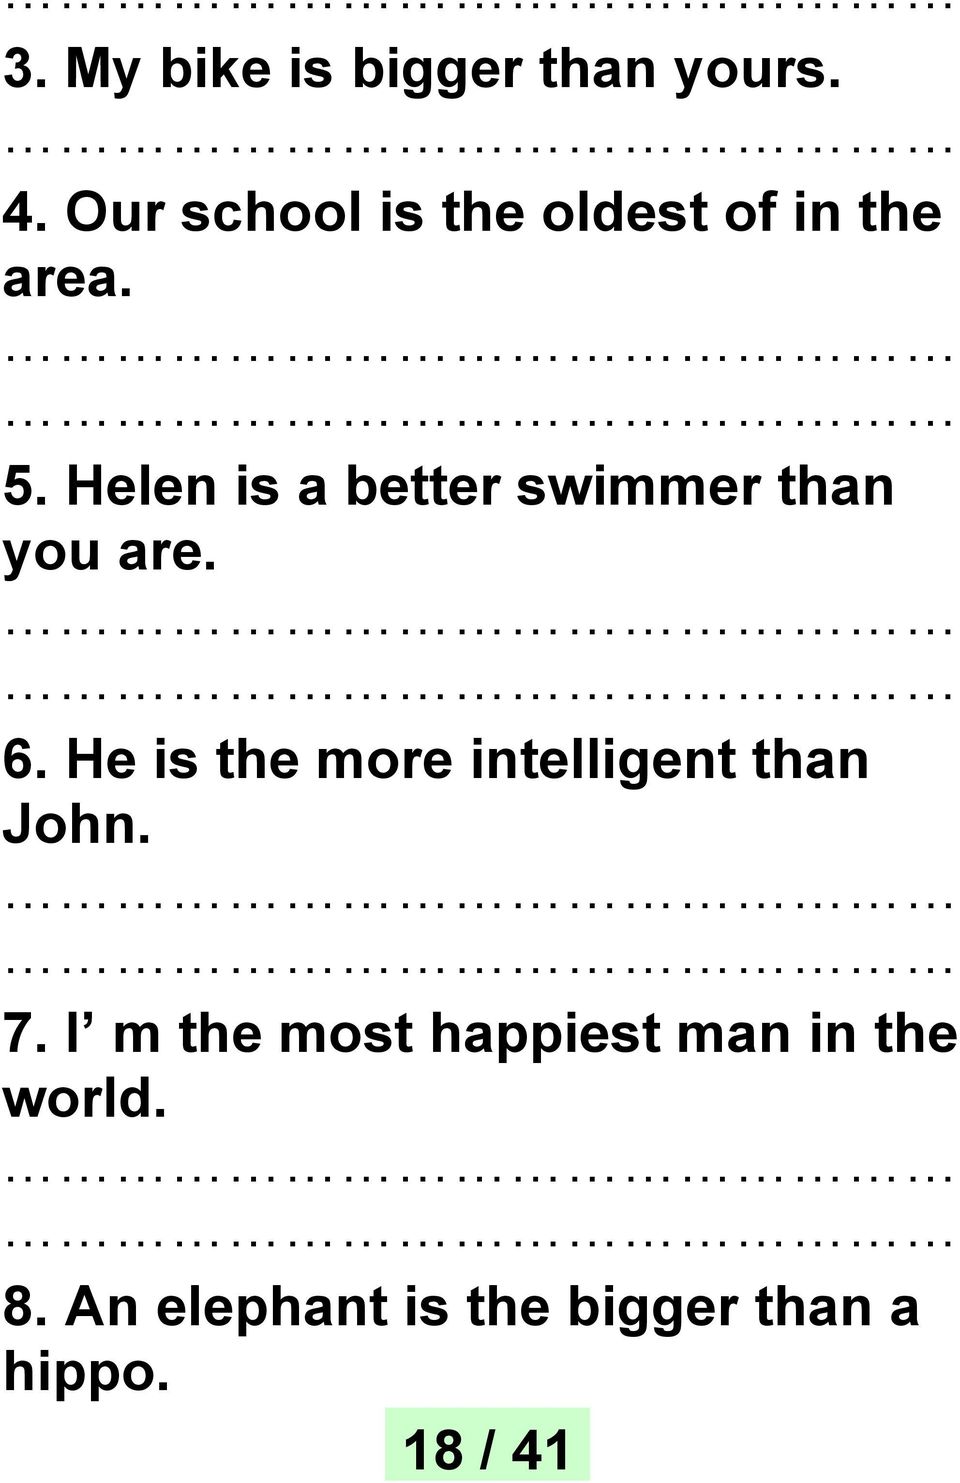 Helen is a better swimmer than you are. 6.